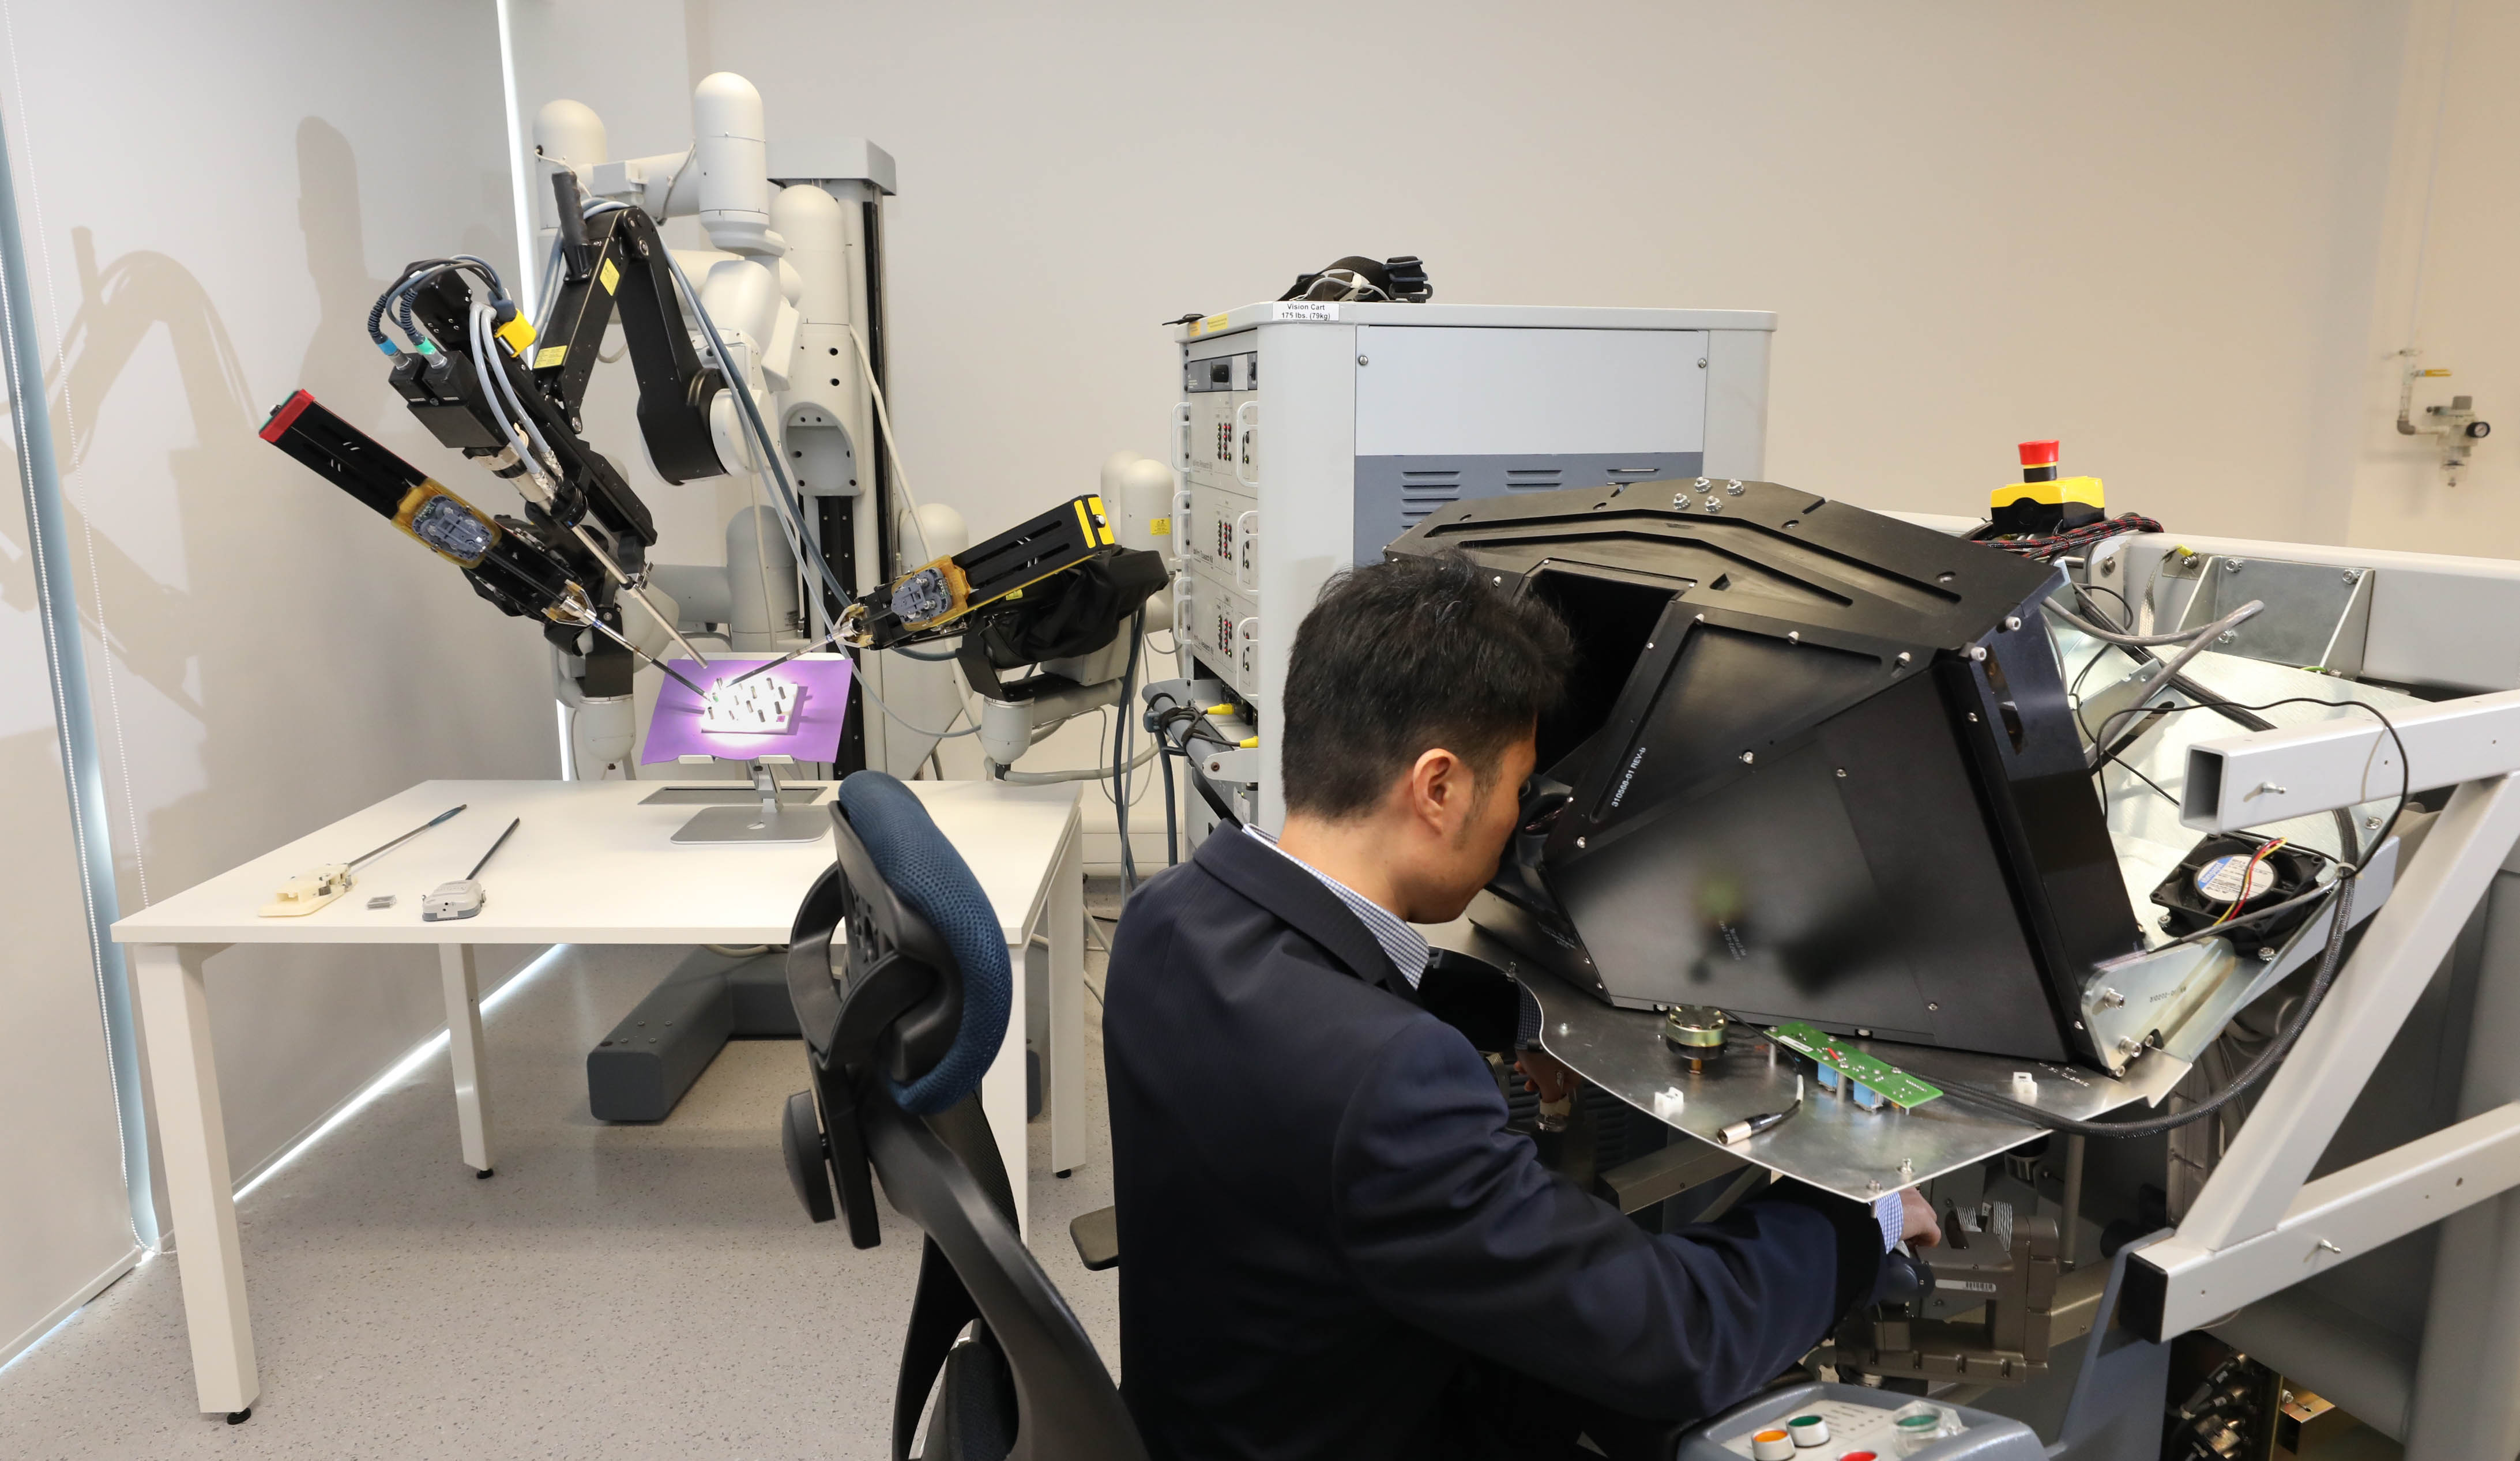 CUHK has been collaborating with Johns Hopkins University to develop medical robotic instruments and control algorithms to provide safer robotic tools for patients by making the operation safer and easier.